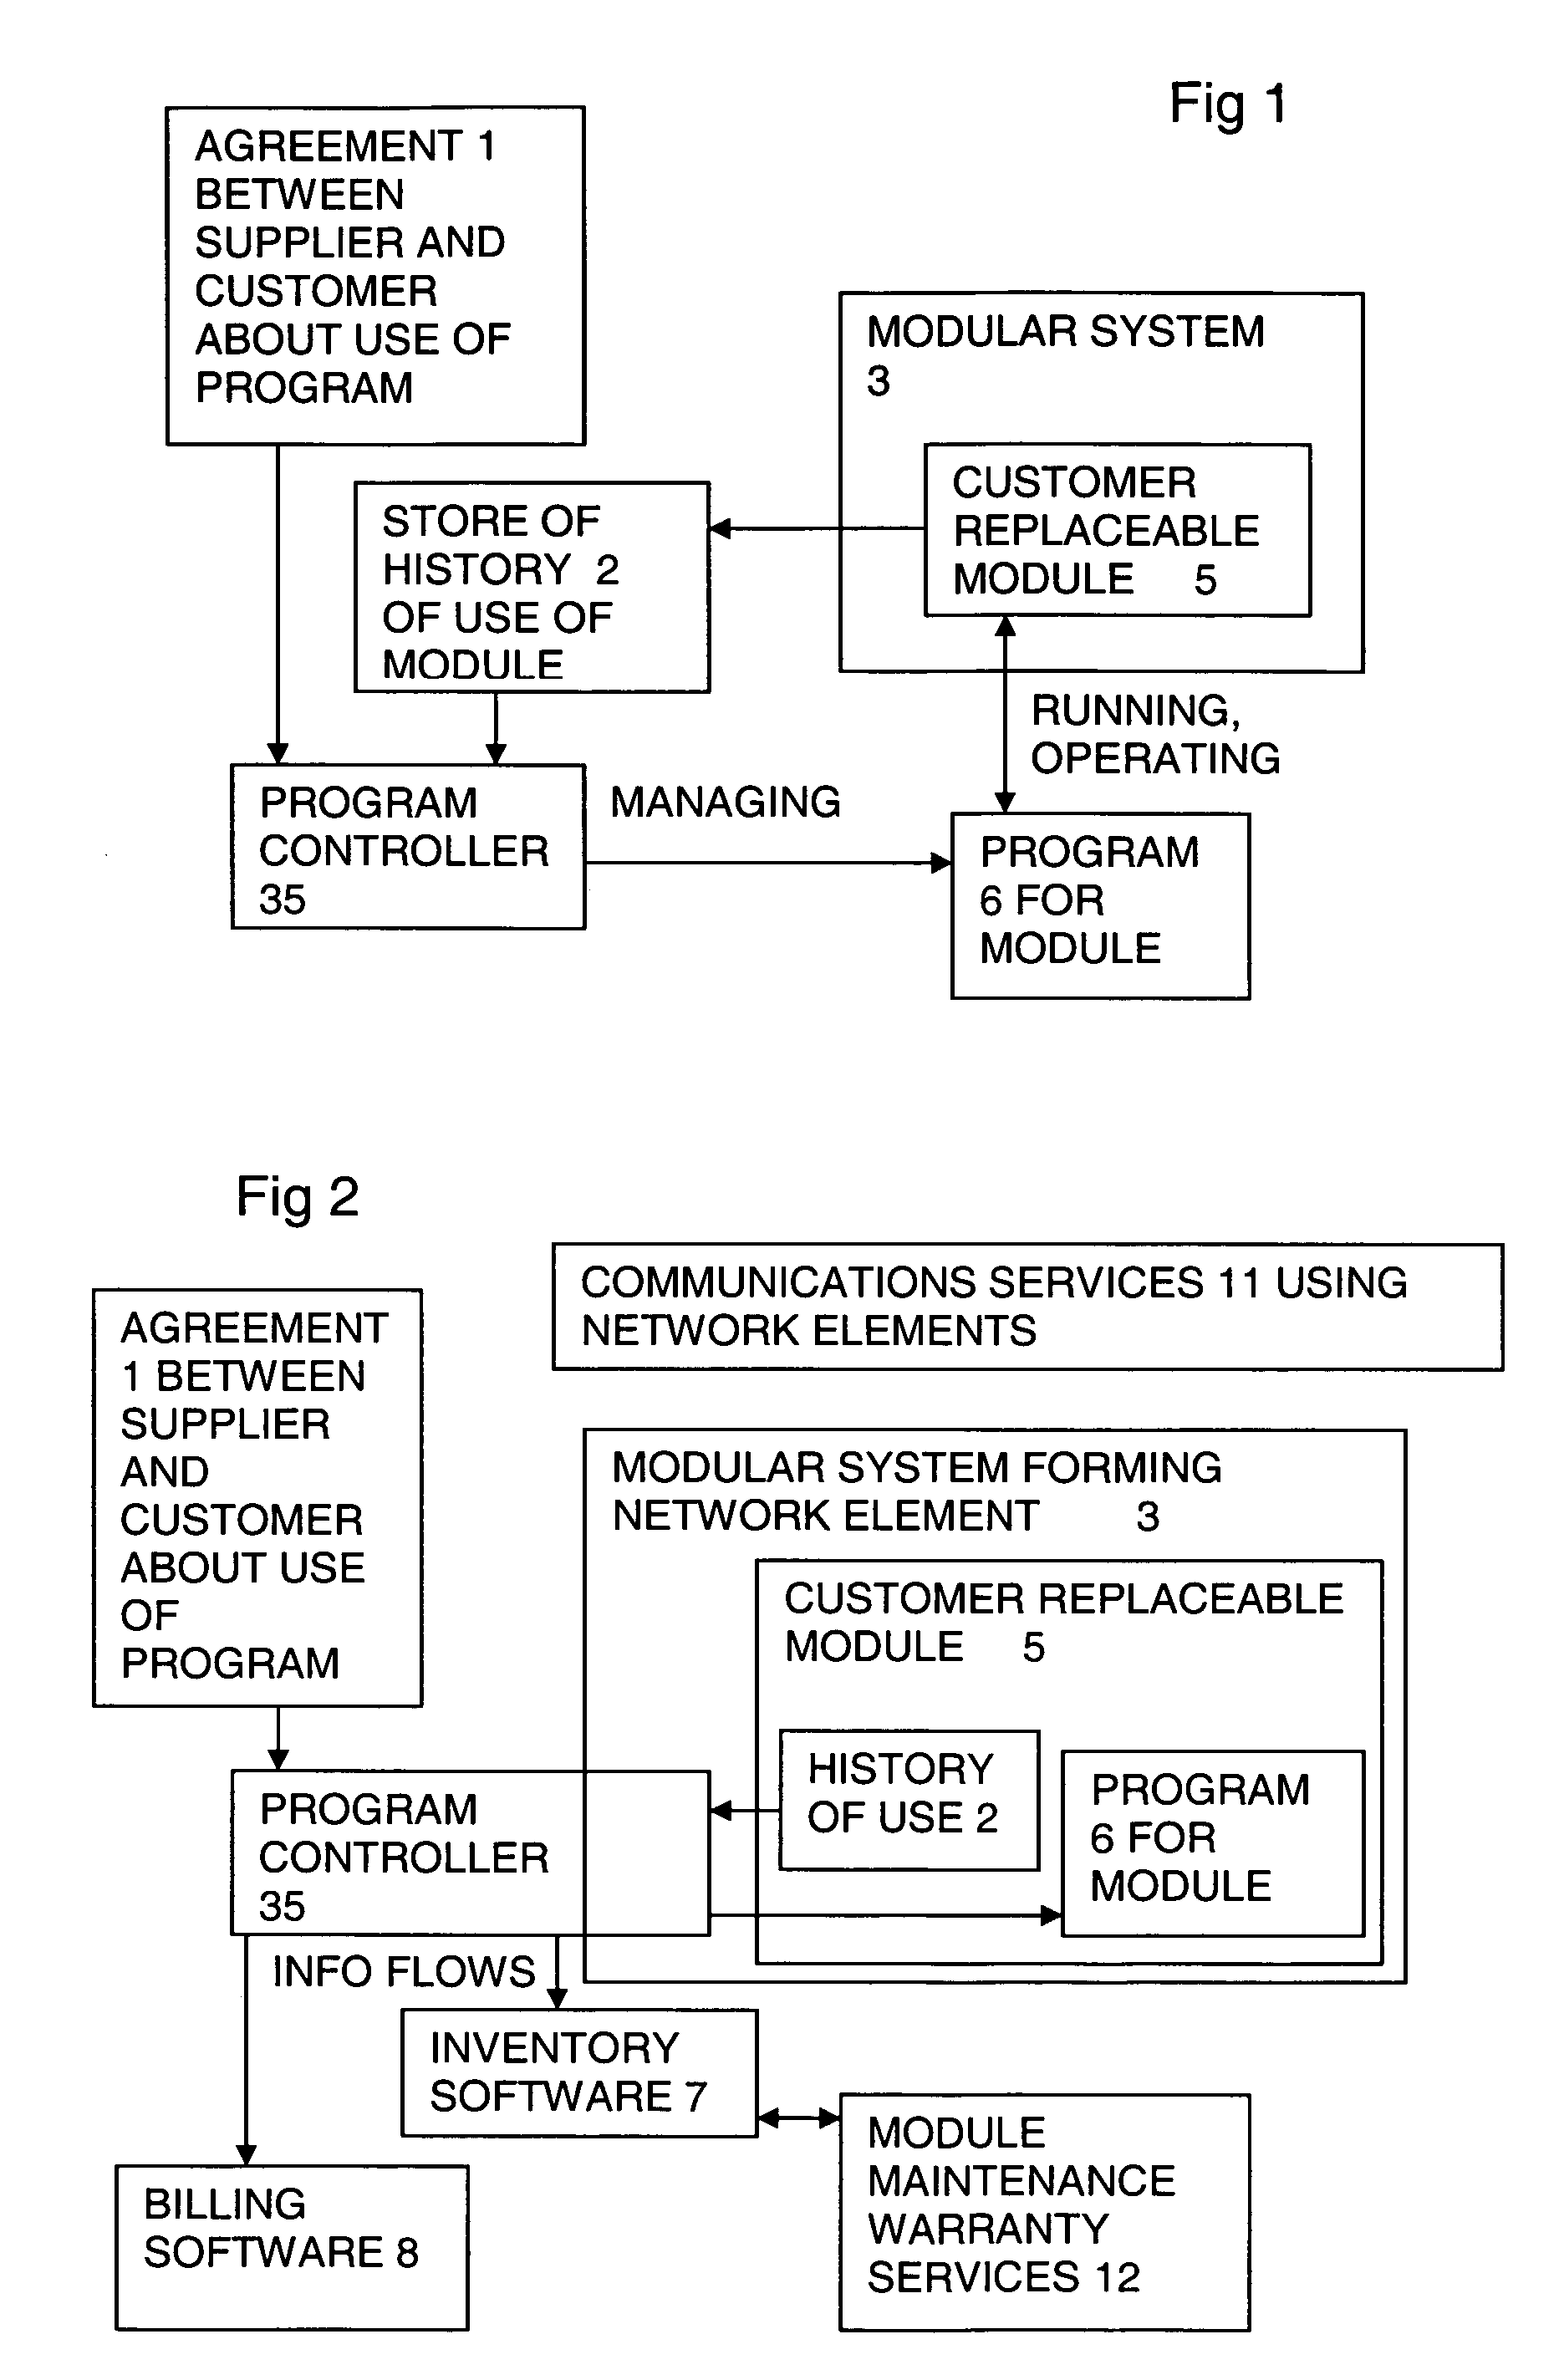 Software configuration of module dependent on history